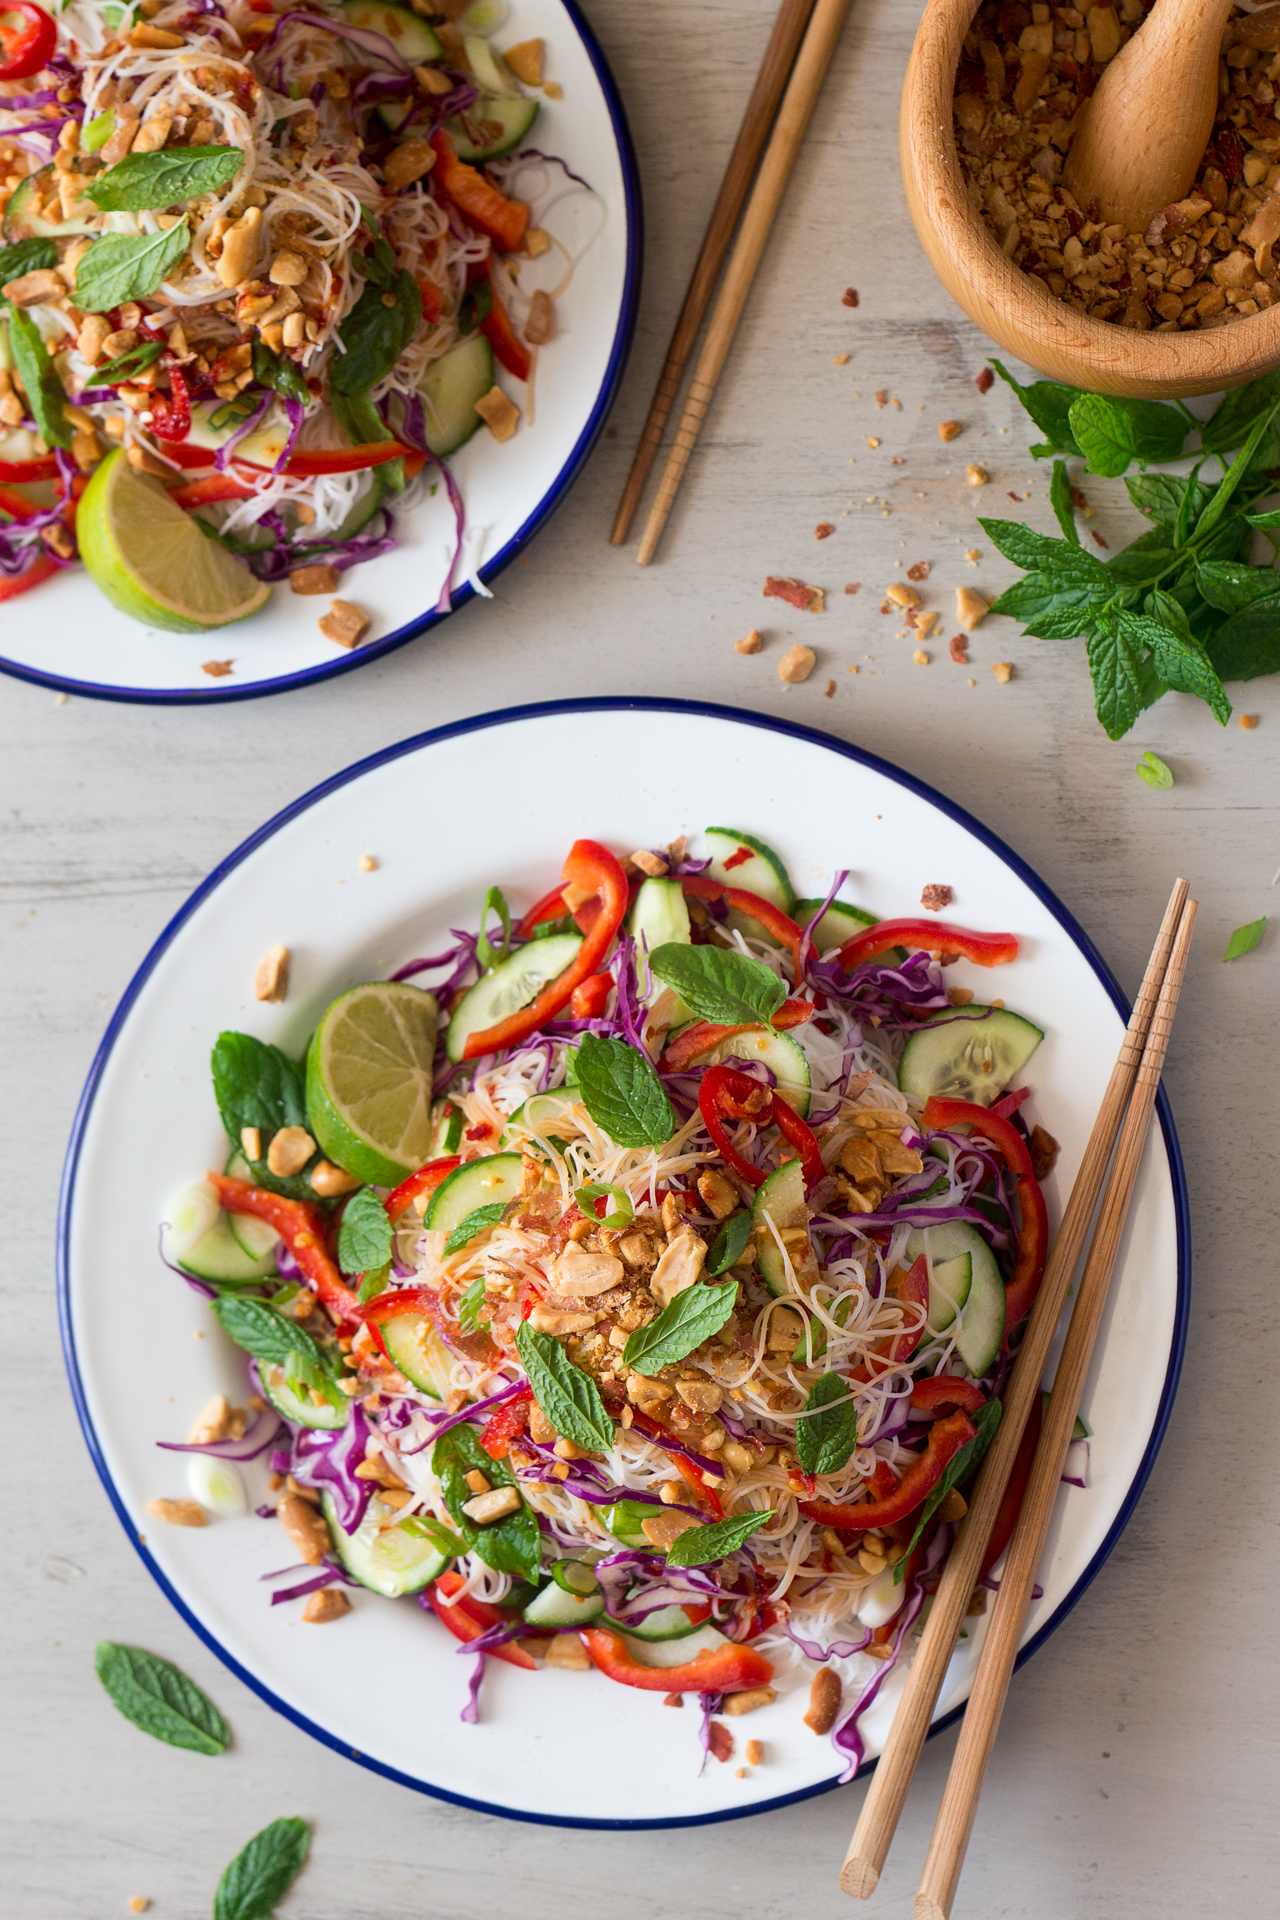 Asian vermicelli salad with peanuts - Lazy Cat Kitchen